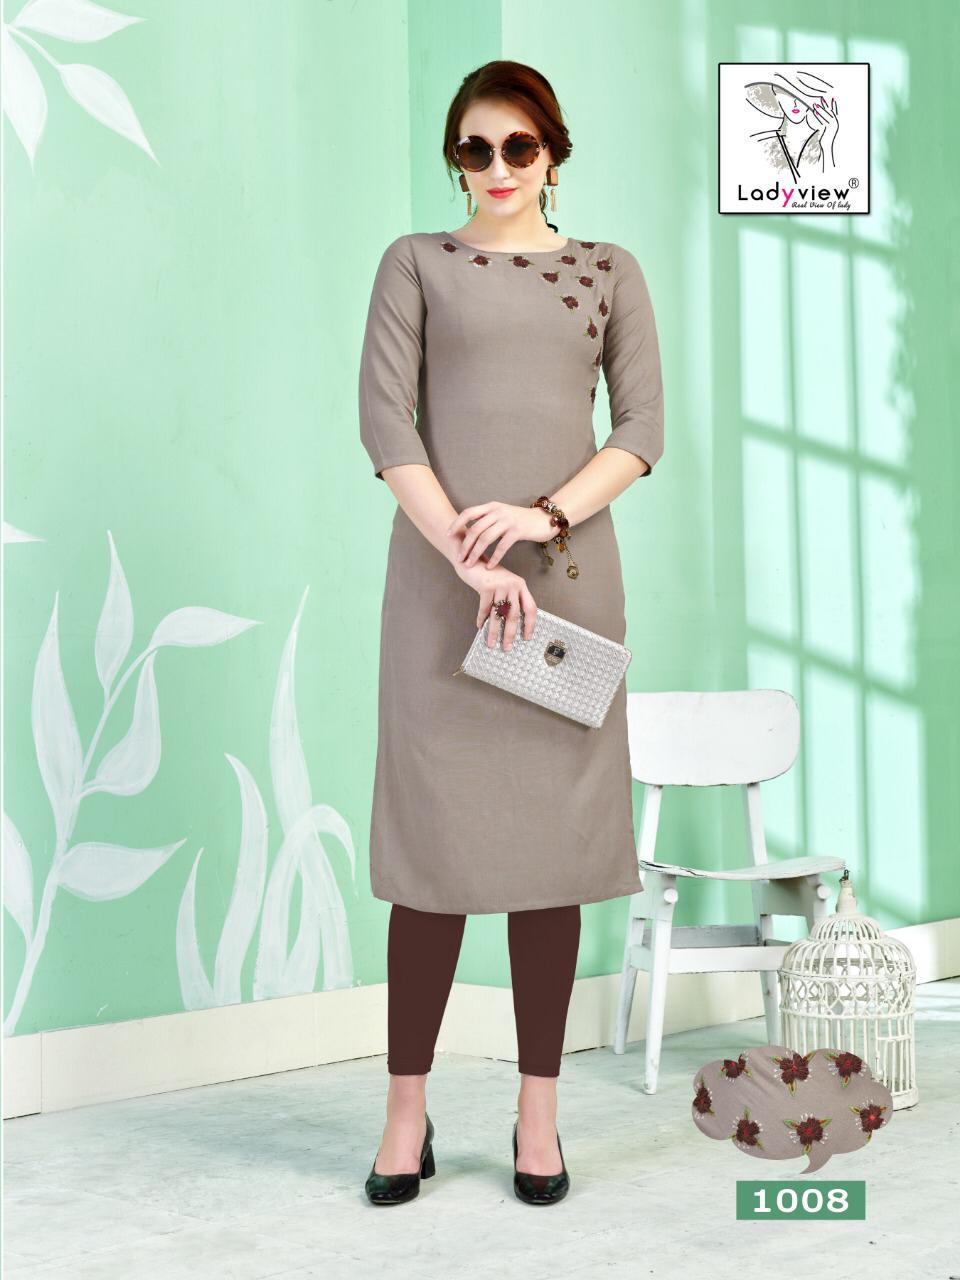 Lady view crystal classy catchy look Kurties